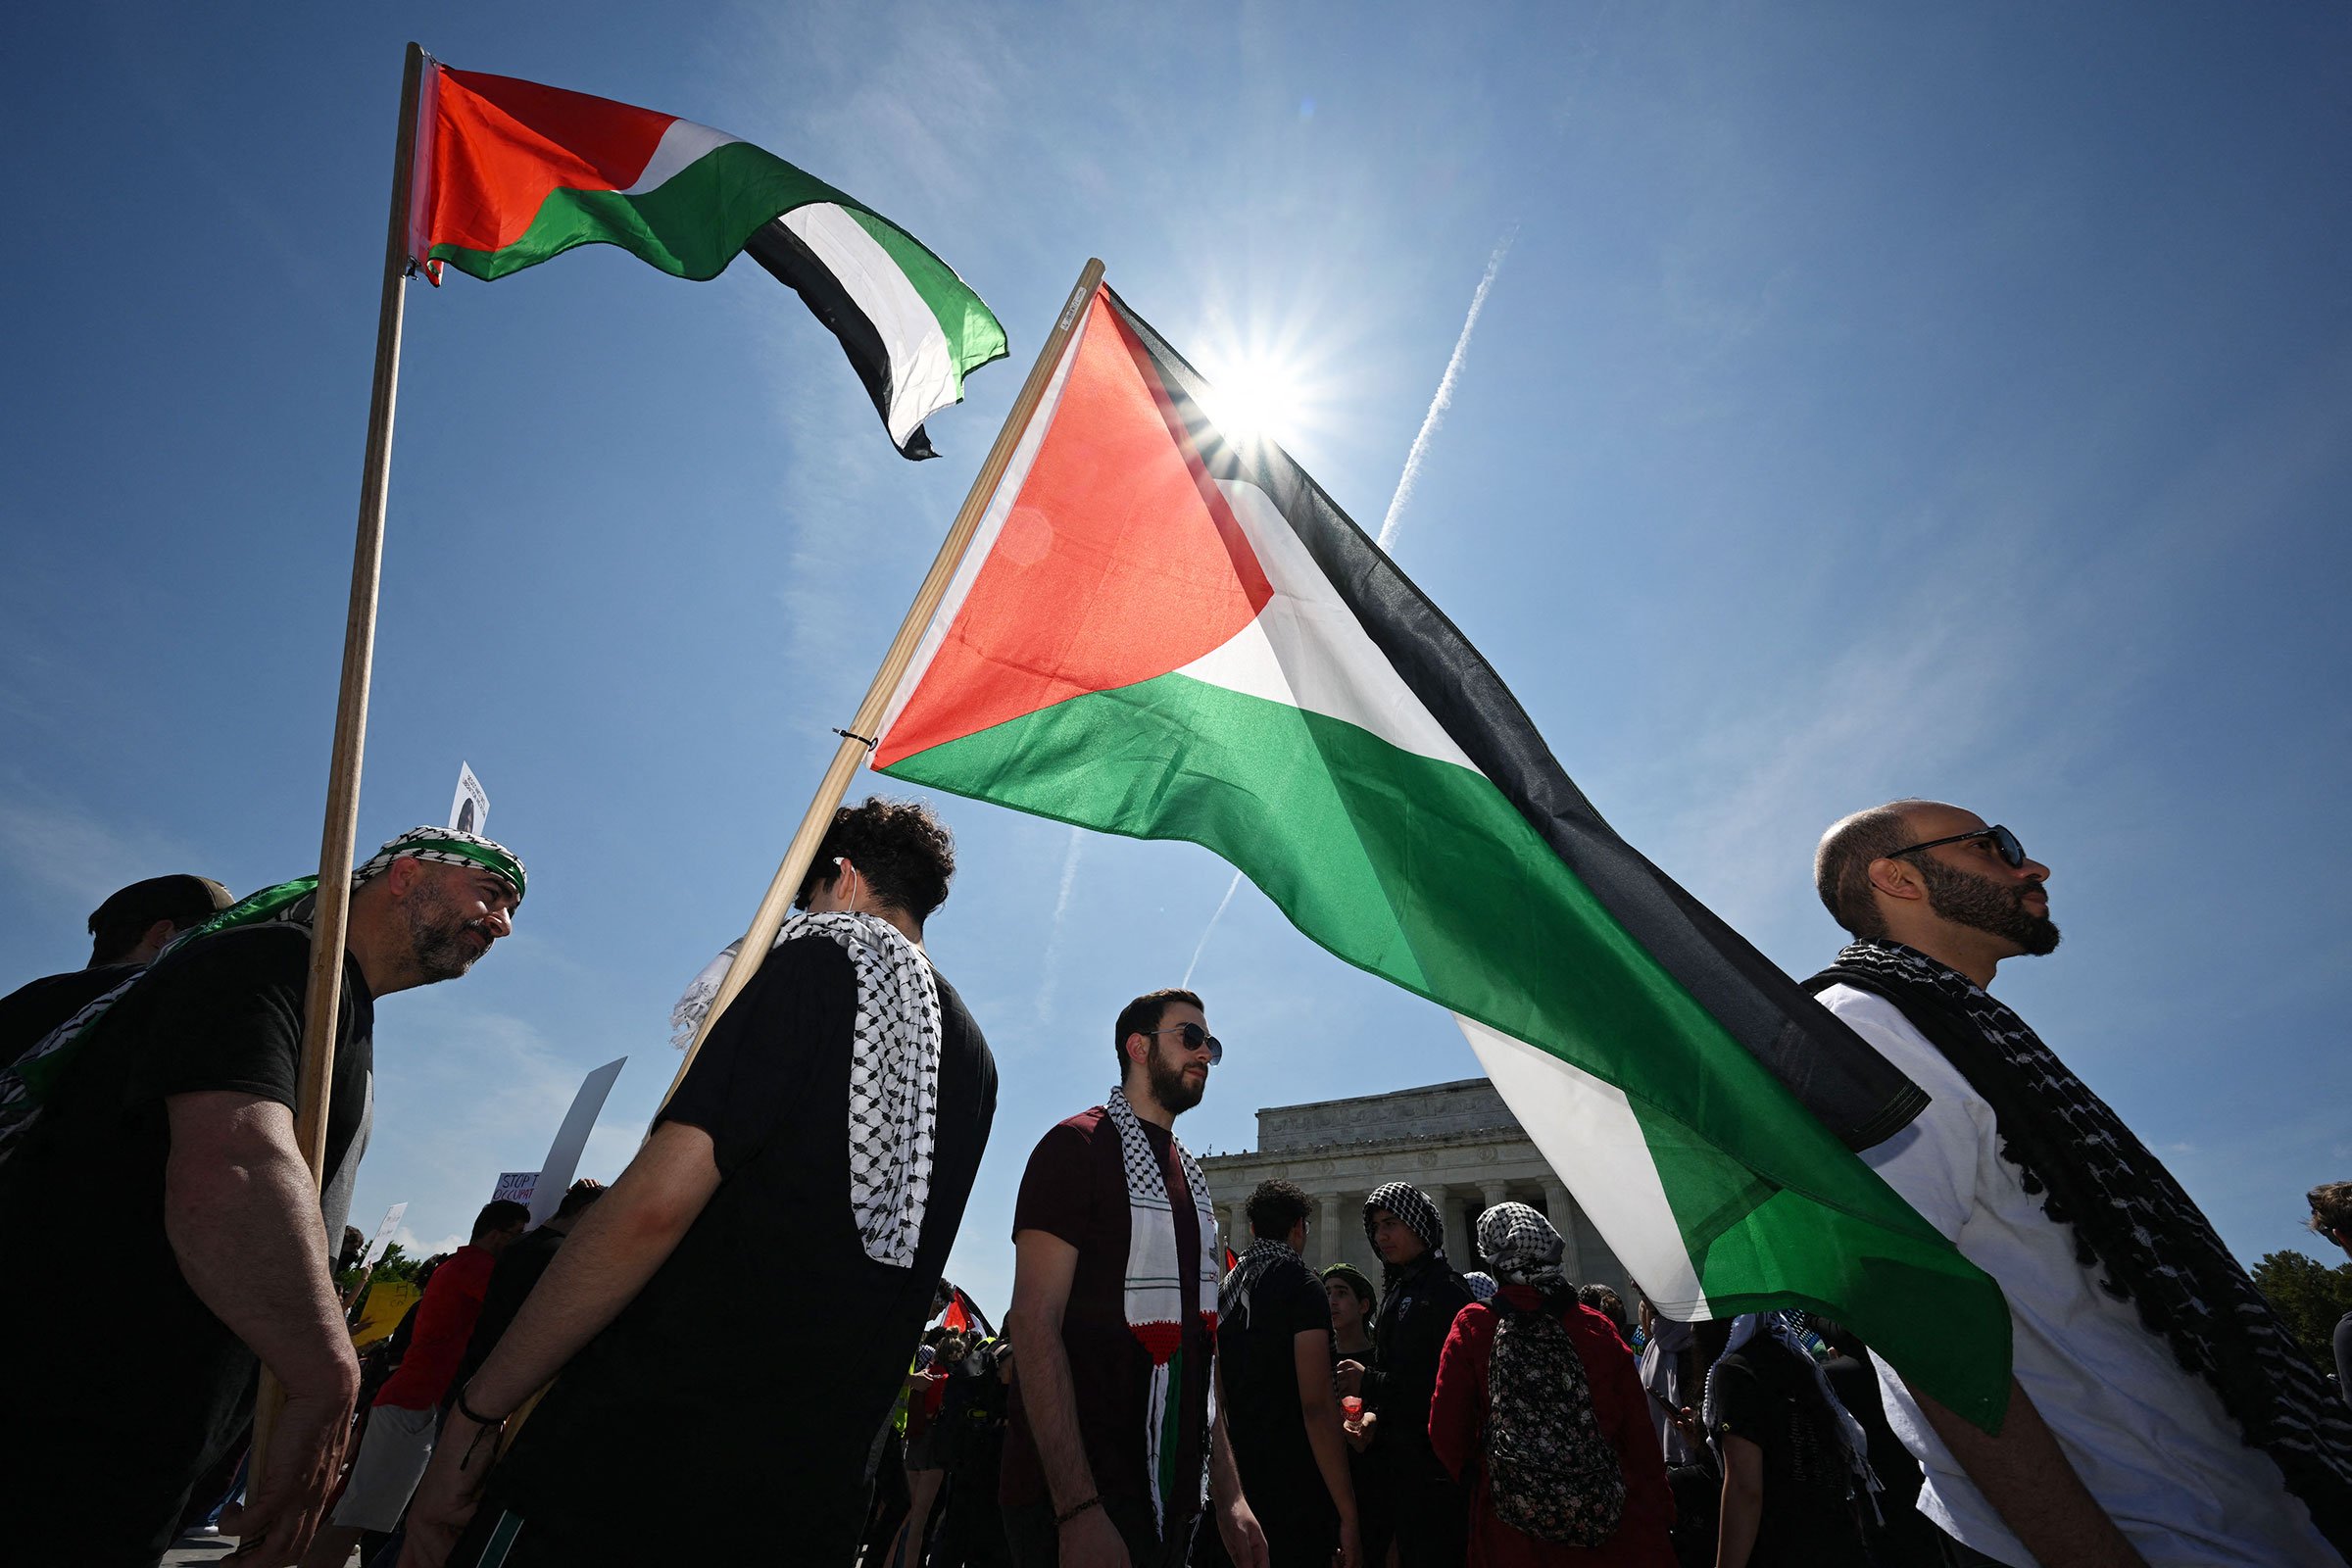 Why Palestine never became an independent country